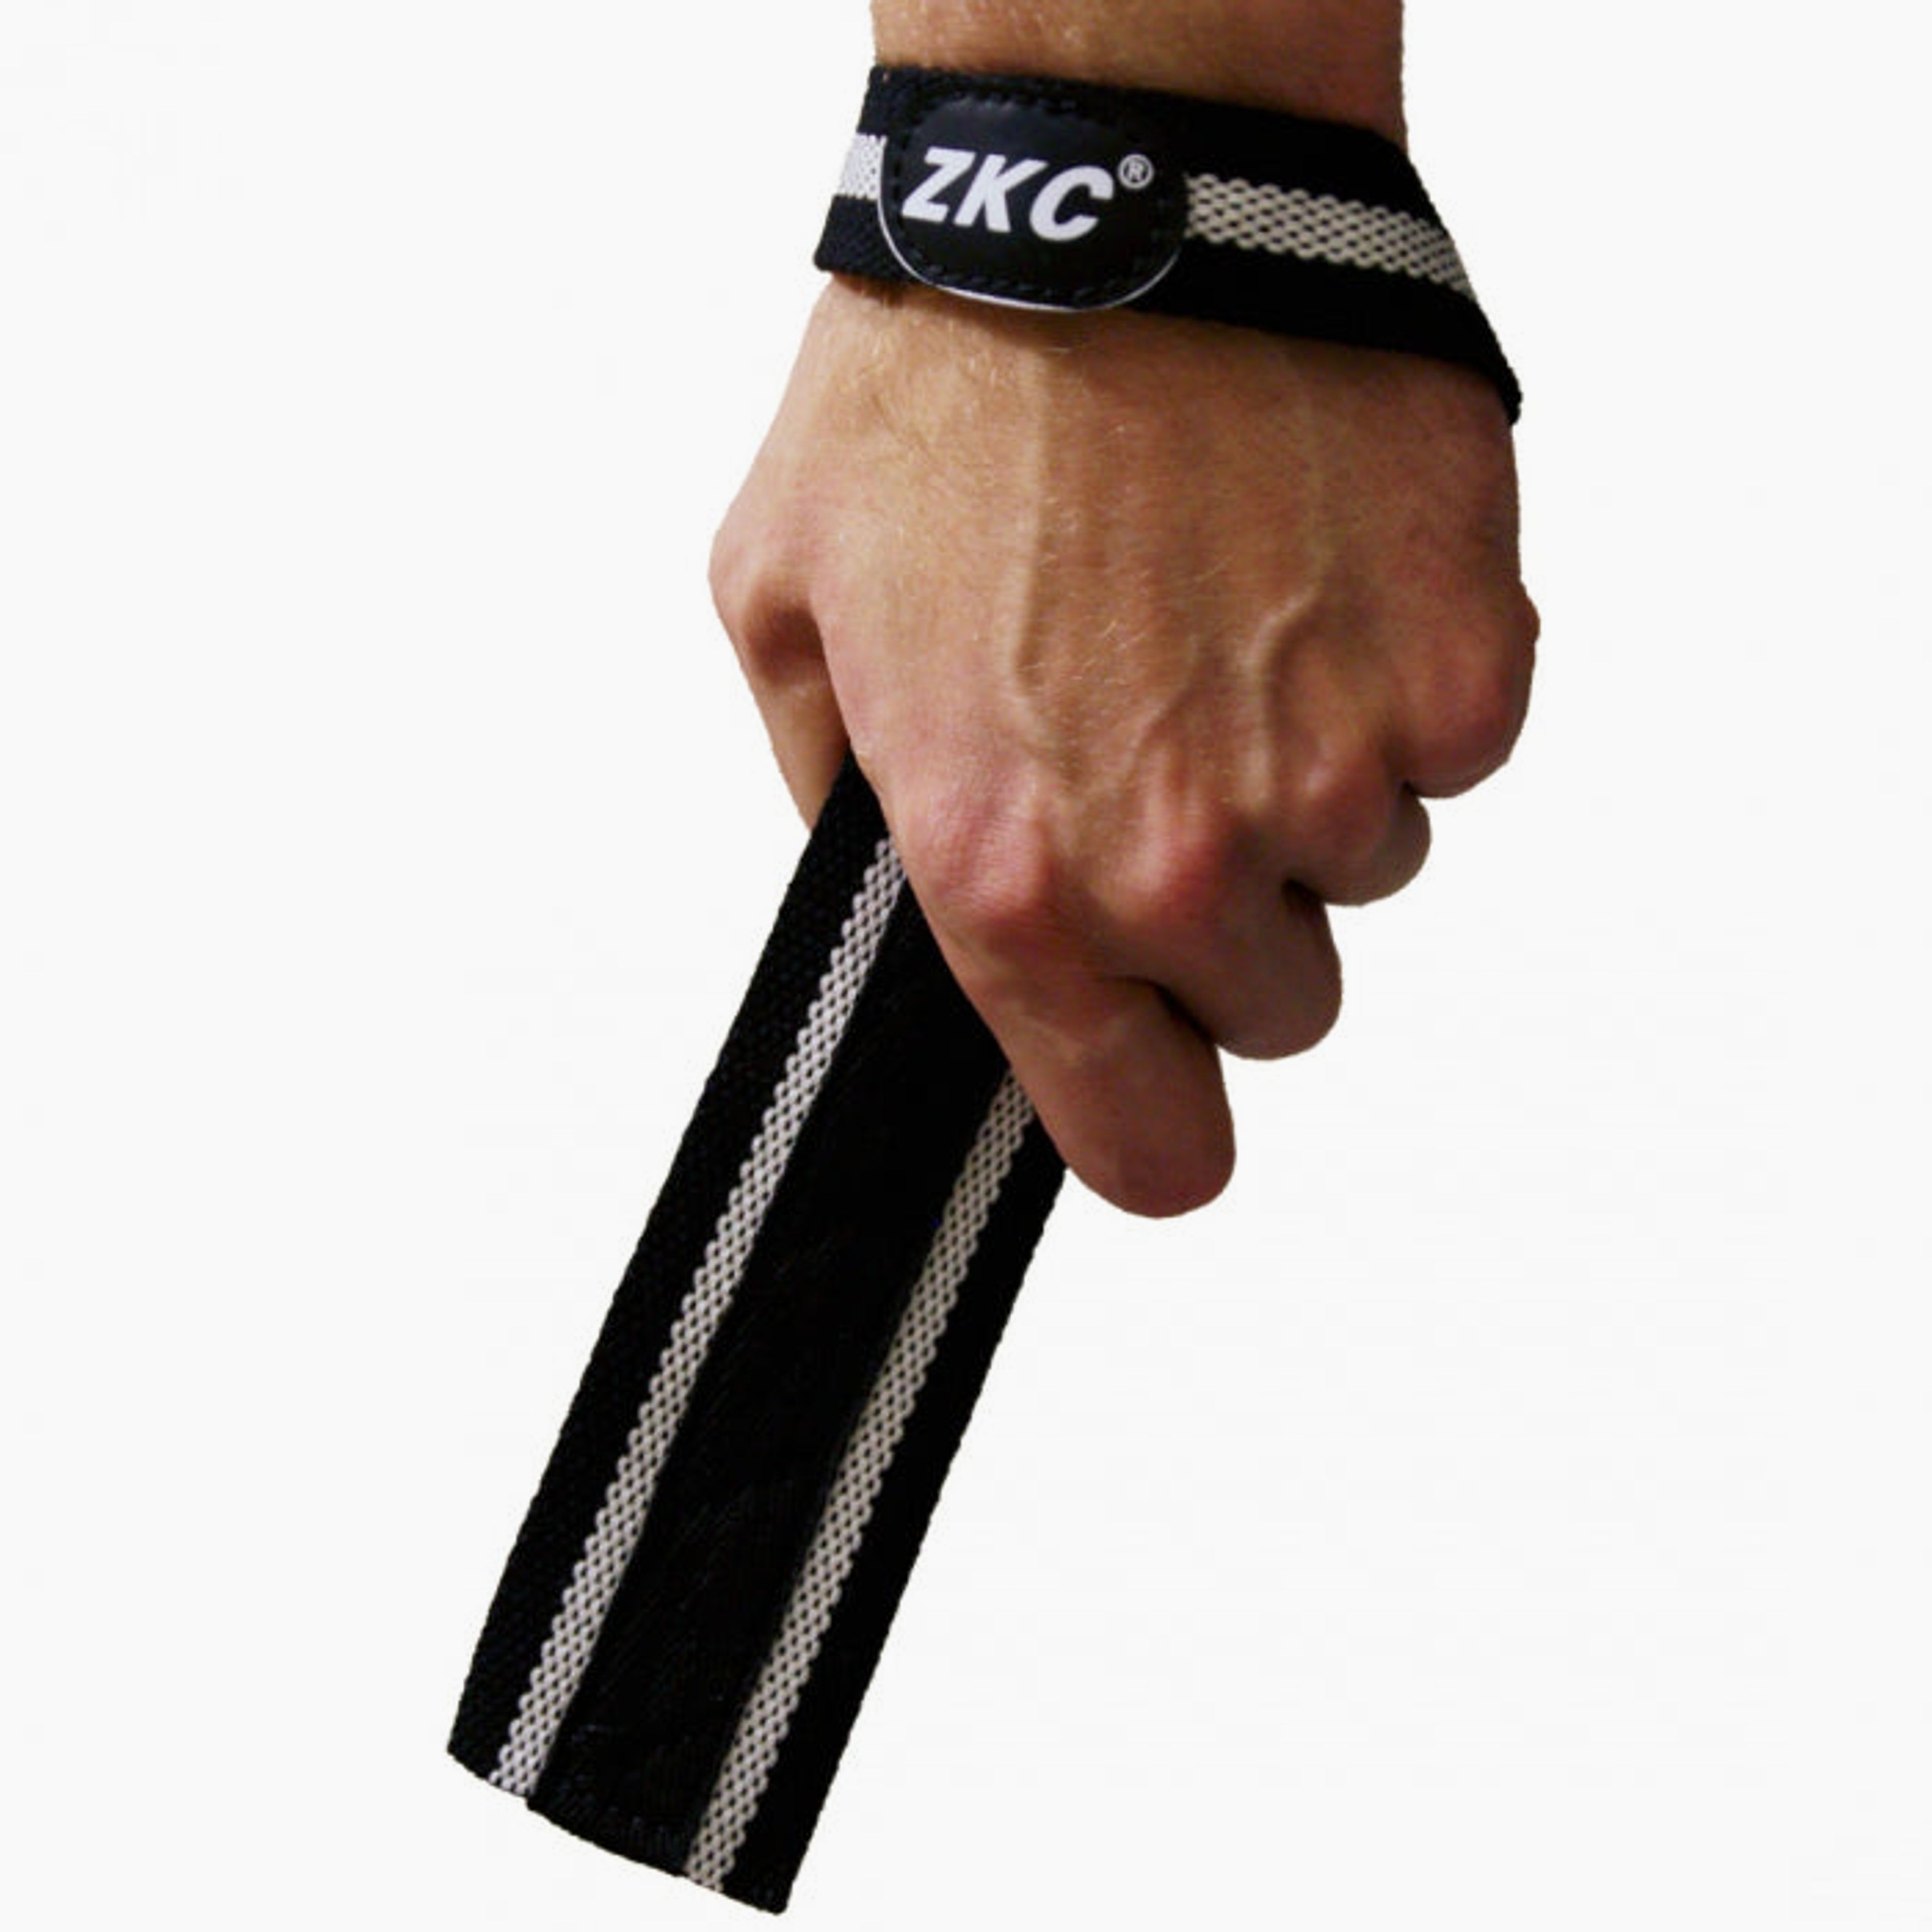 ZKC Lifting Straps - Normal Style